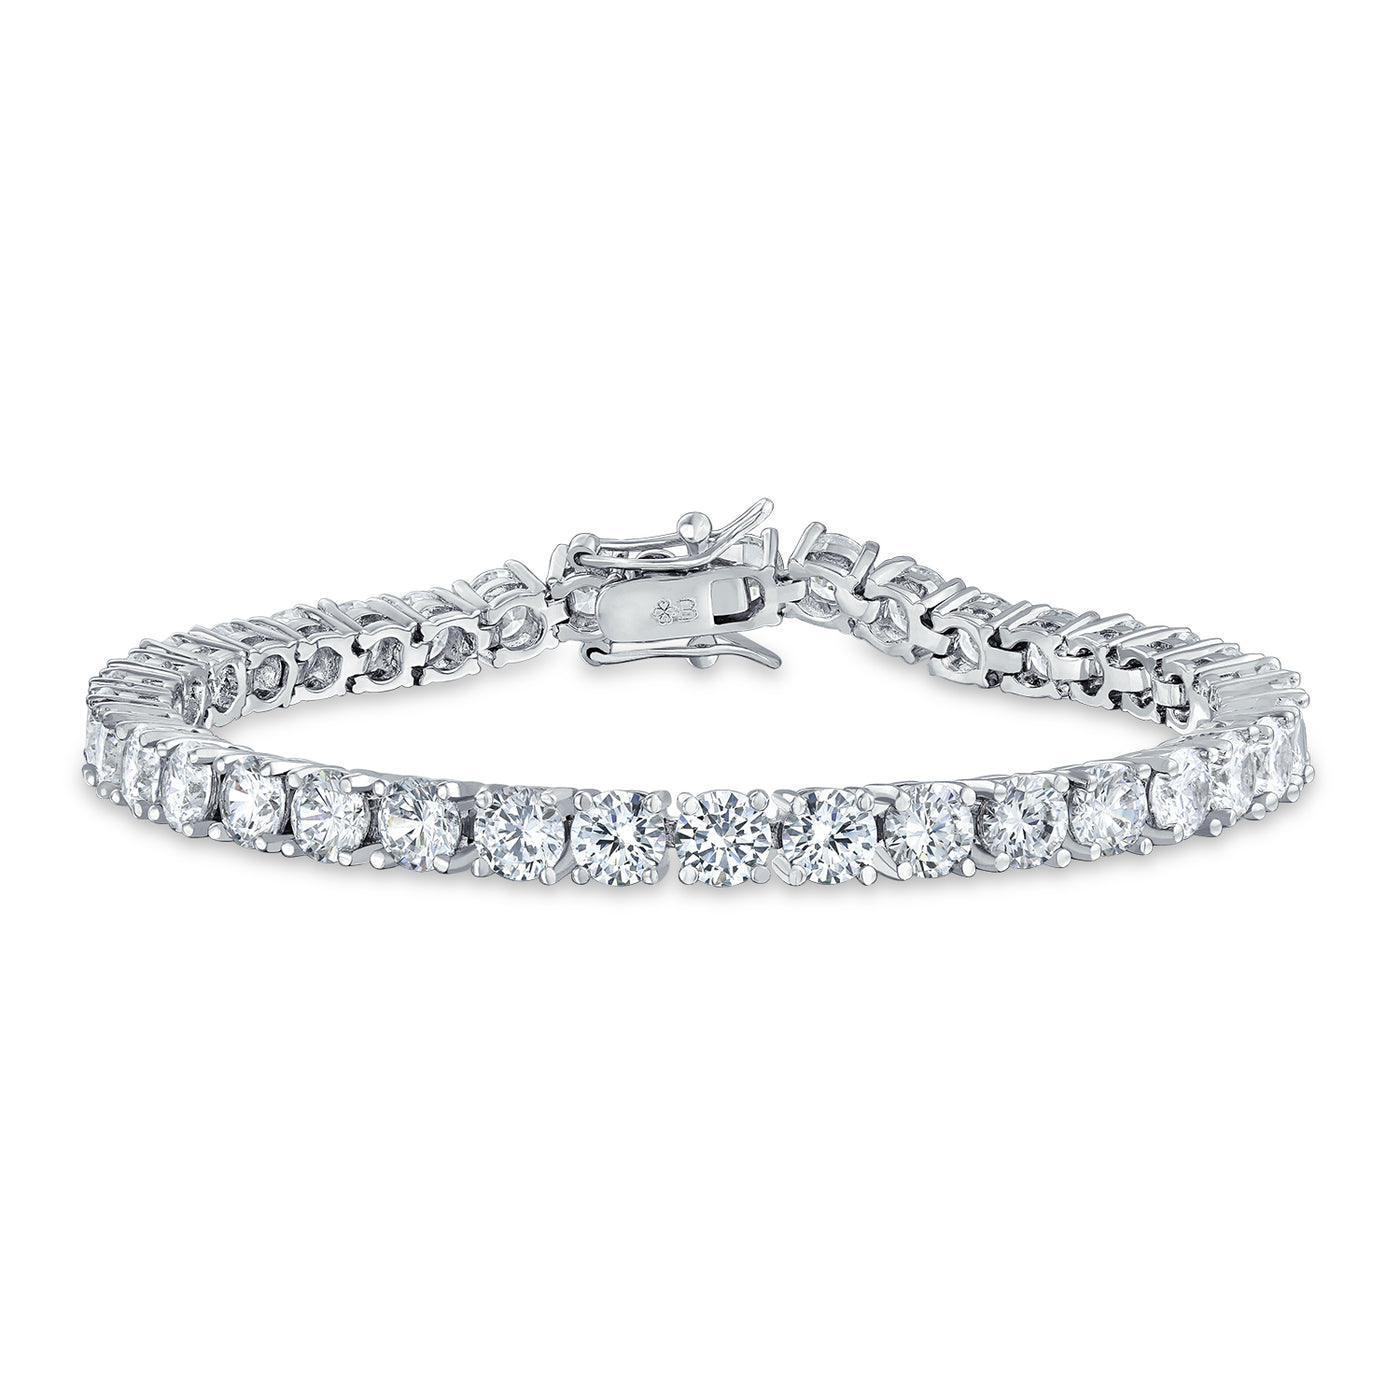 Bridal AAA CZ Solitaire Round Tennis Bracelet Sterling Silver 7.5-8"